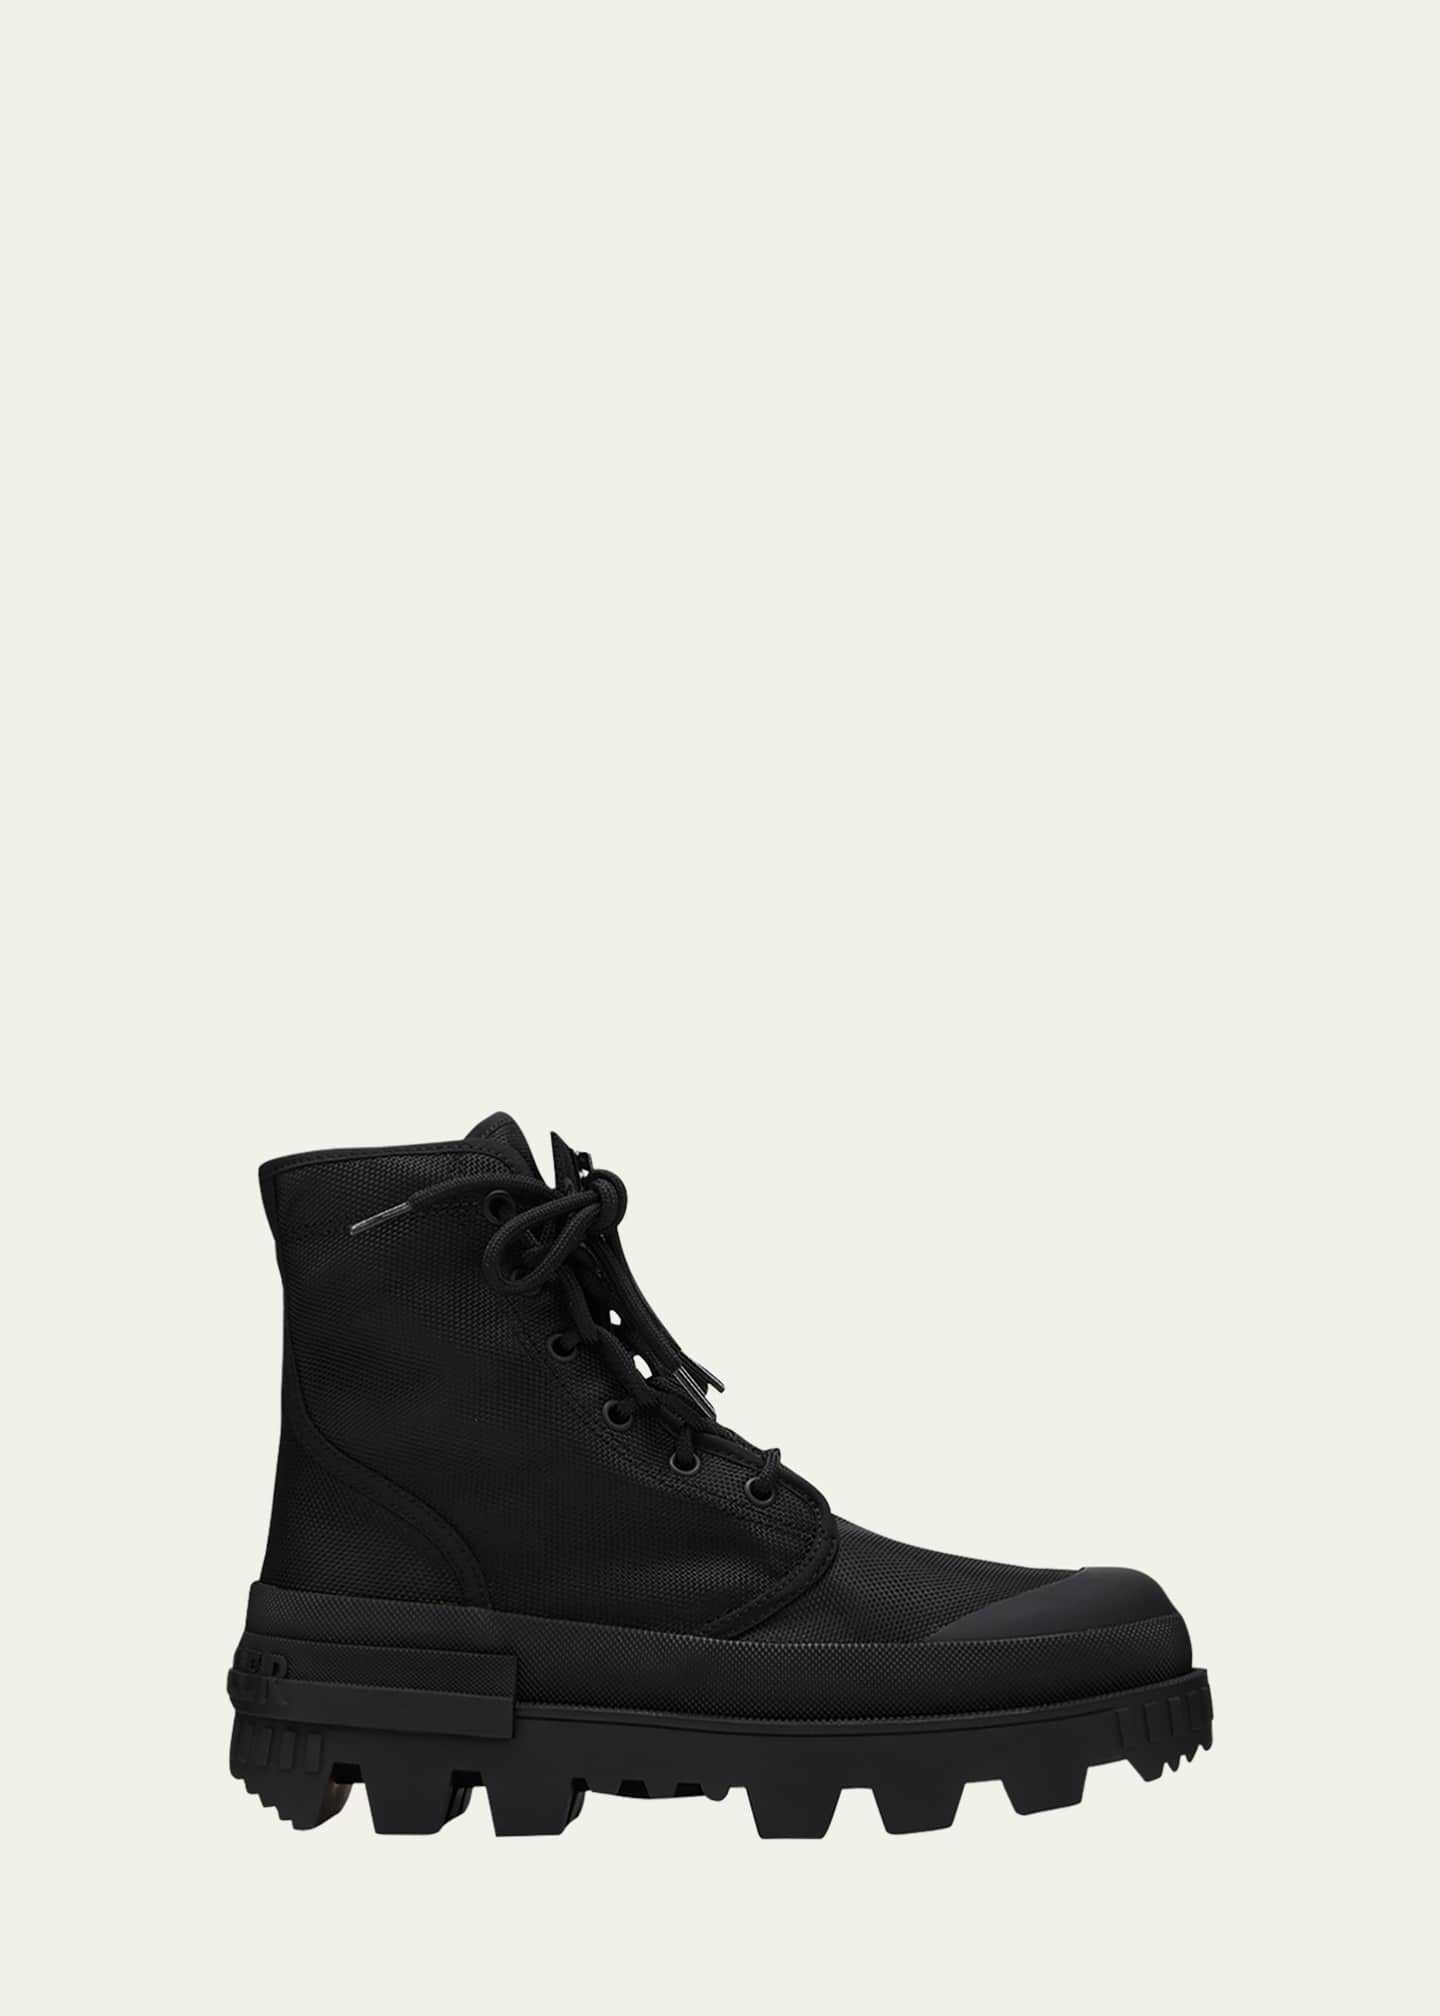 Moncler Genius Hyke Desertyx Ankle Boots